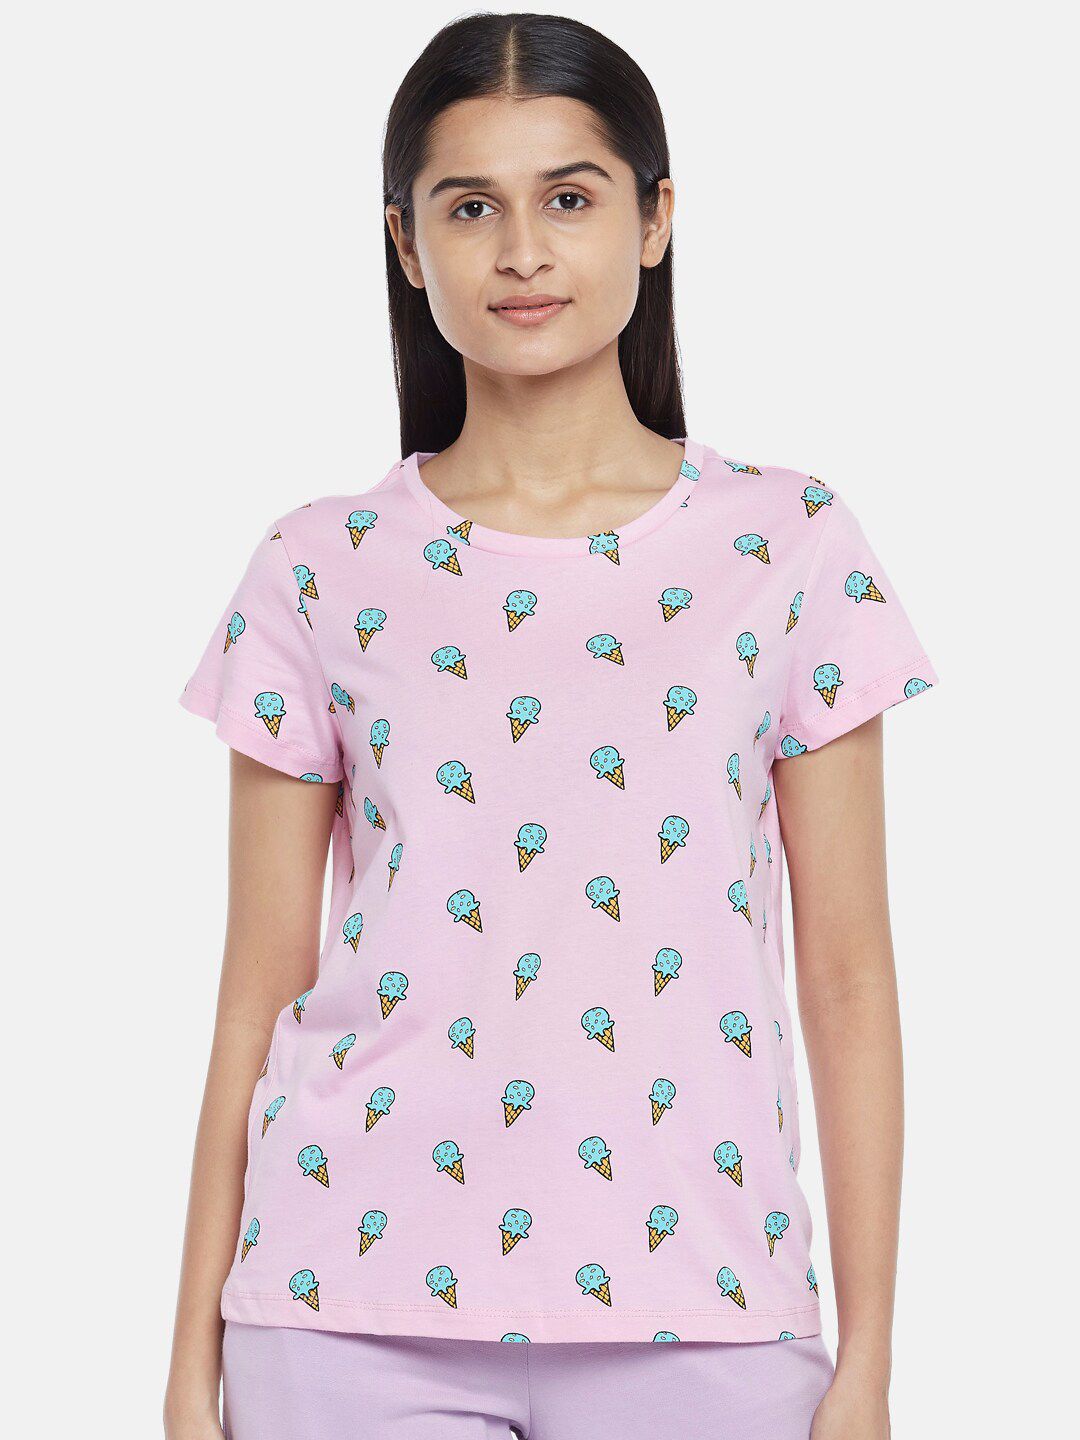 Dreamz by Pantaloons Women Pink & Green Print Pure Cotton Lounge T-shirt Price in India